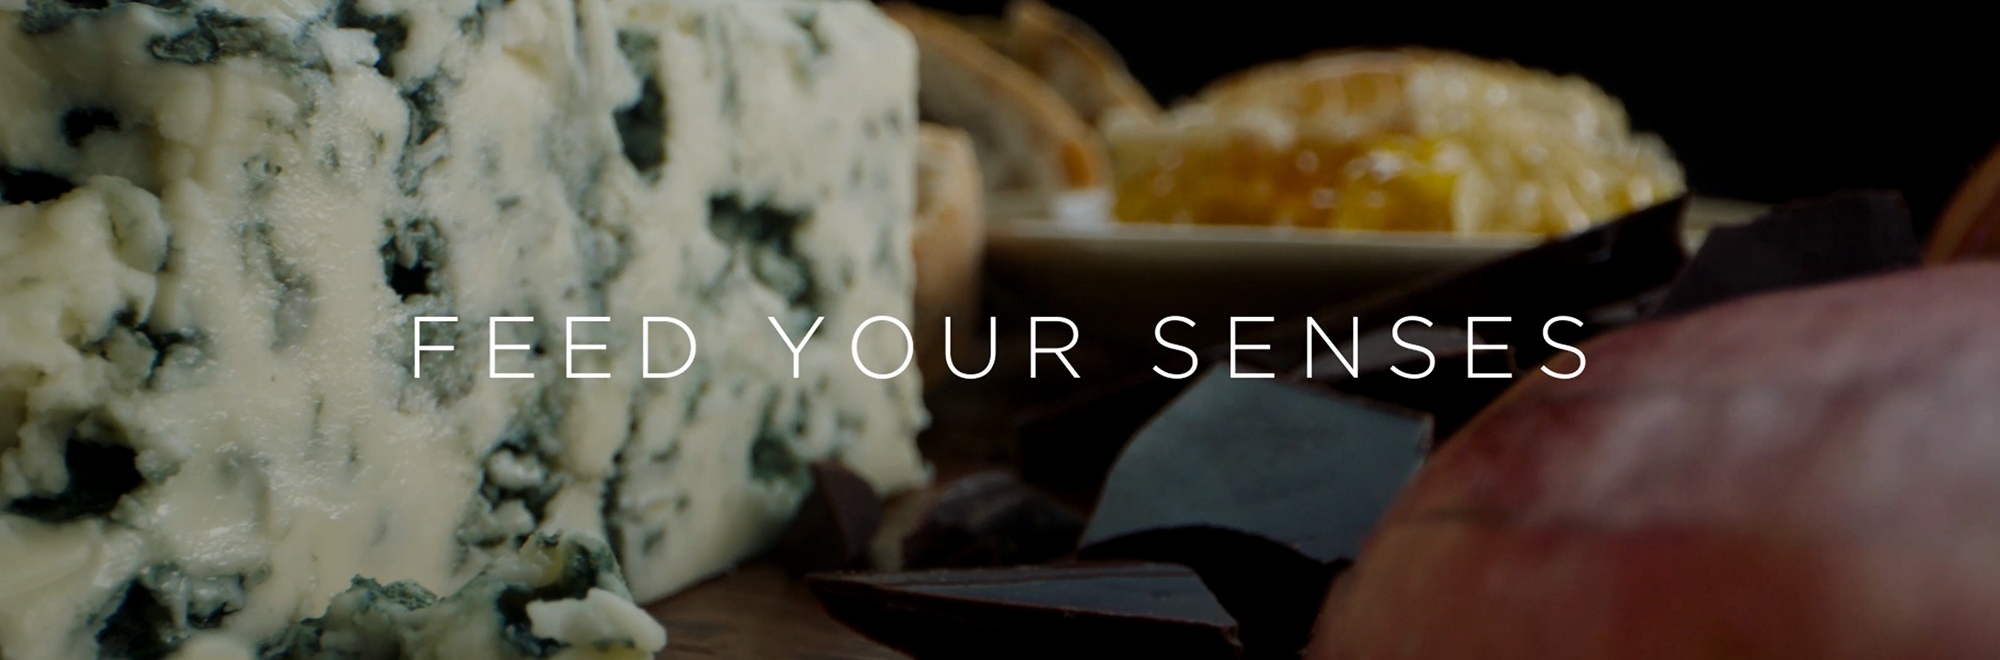 Feed your senses with the new content-led campaign from Castello by Mother